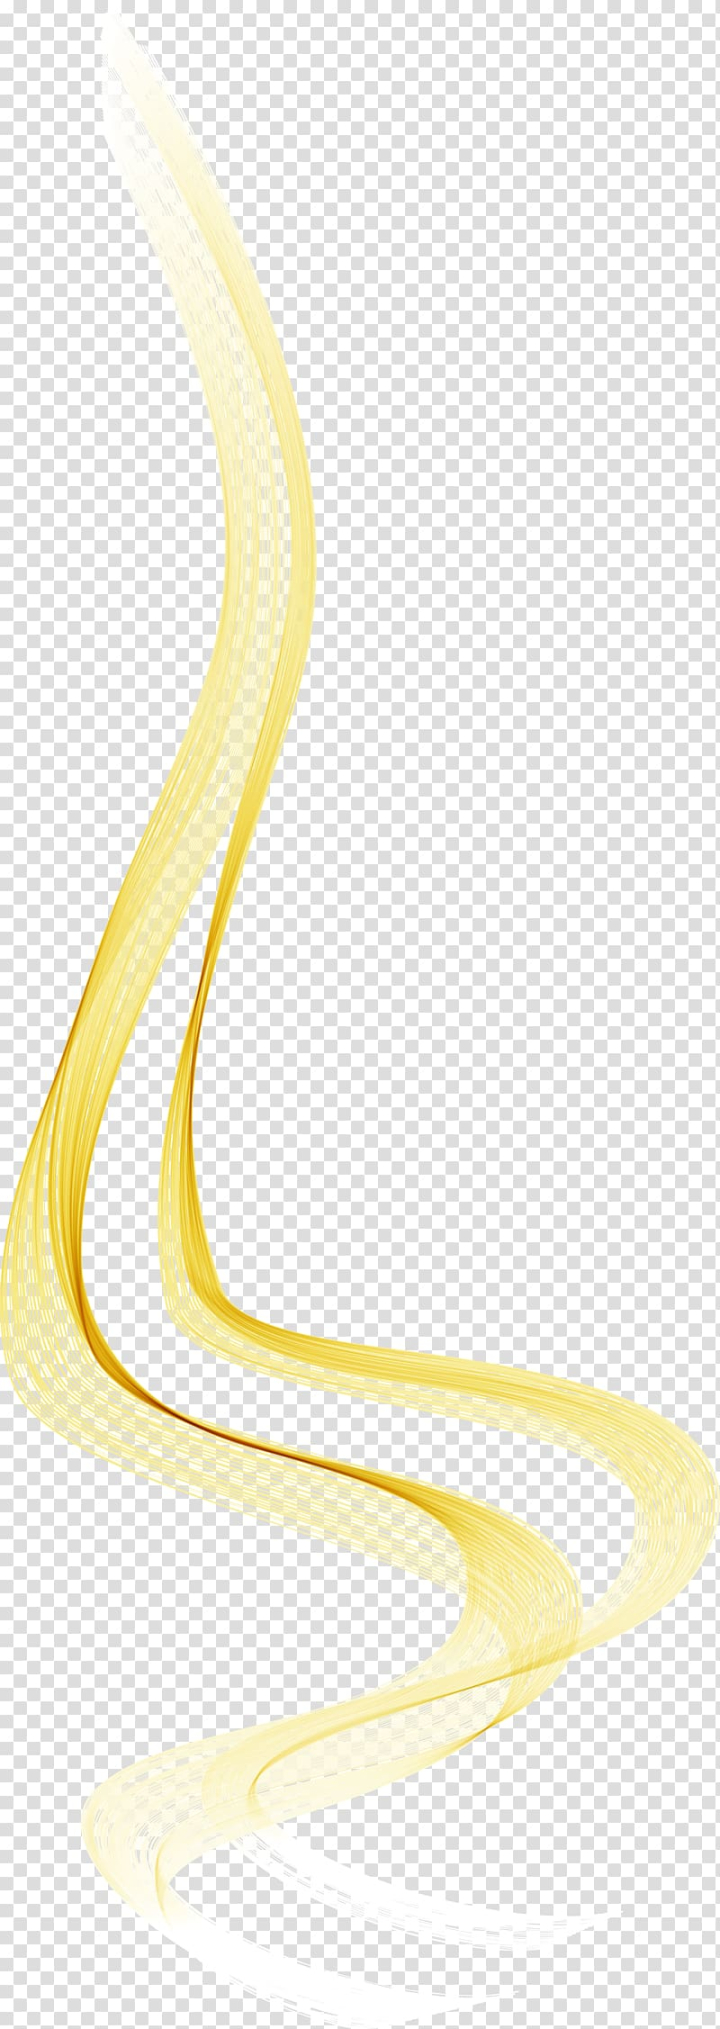 flare,curve,texture,angle,camera lens,text,gold,material,light,dream,pattern,optics,shine,transparency and translucency,line,product design,lens flare,circle,computer icons,decorative patterns,font,fresh,glare,yellow,golden,graphic,illustration,png clipart,free png,transparent background,free clipart,clip art,free download,png,comhiclipart